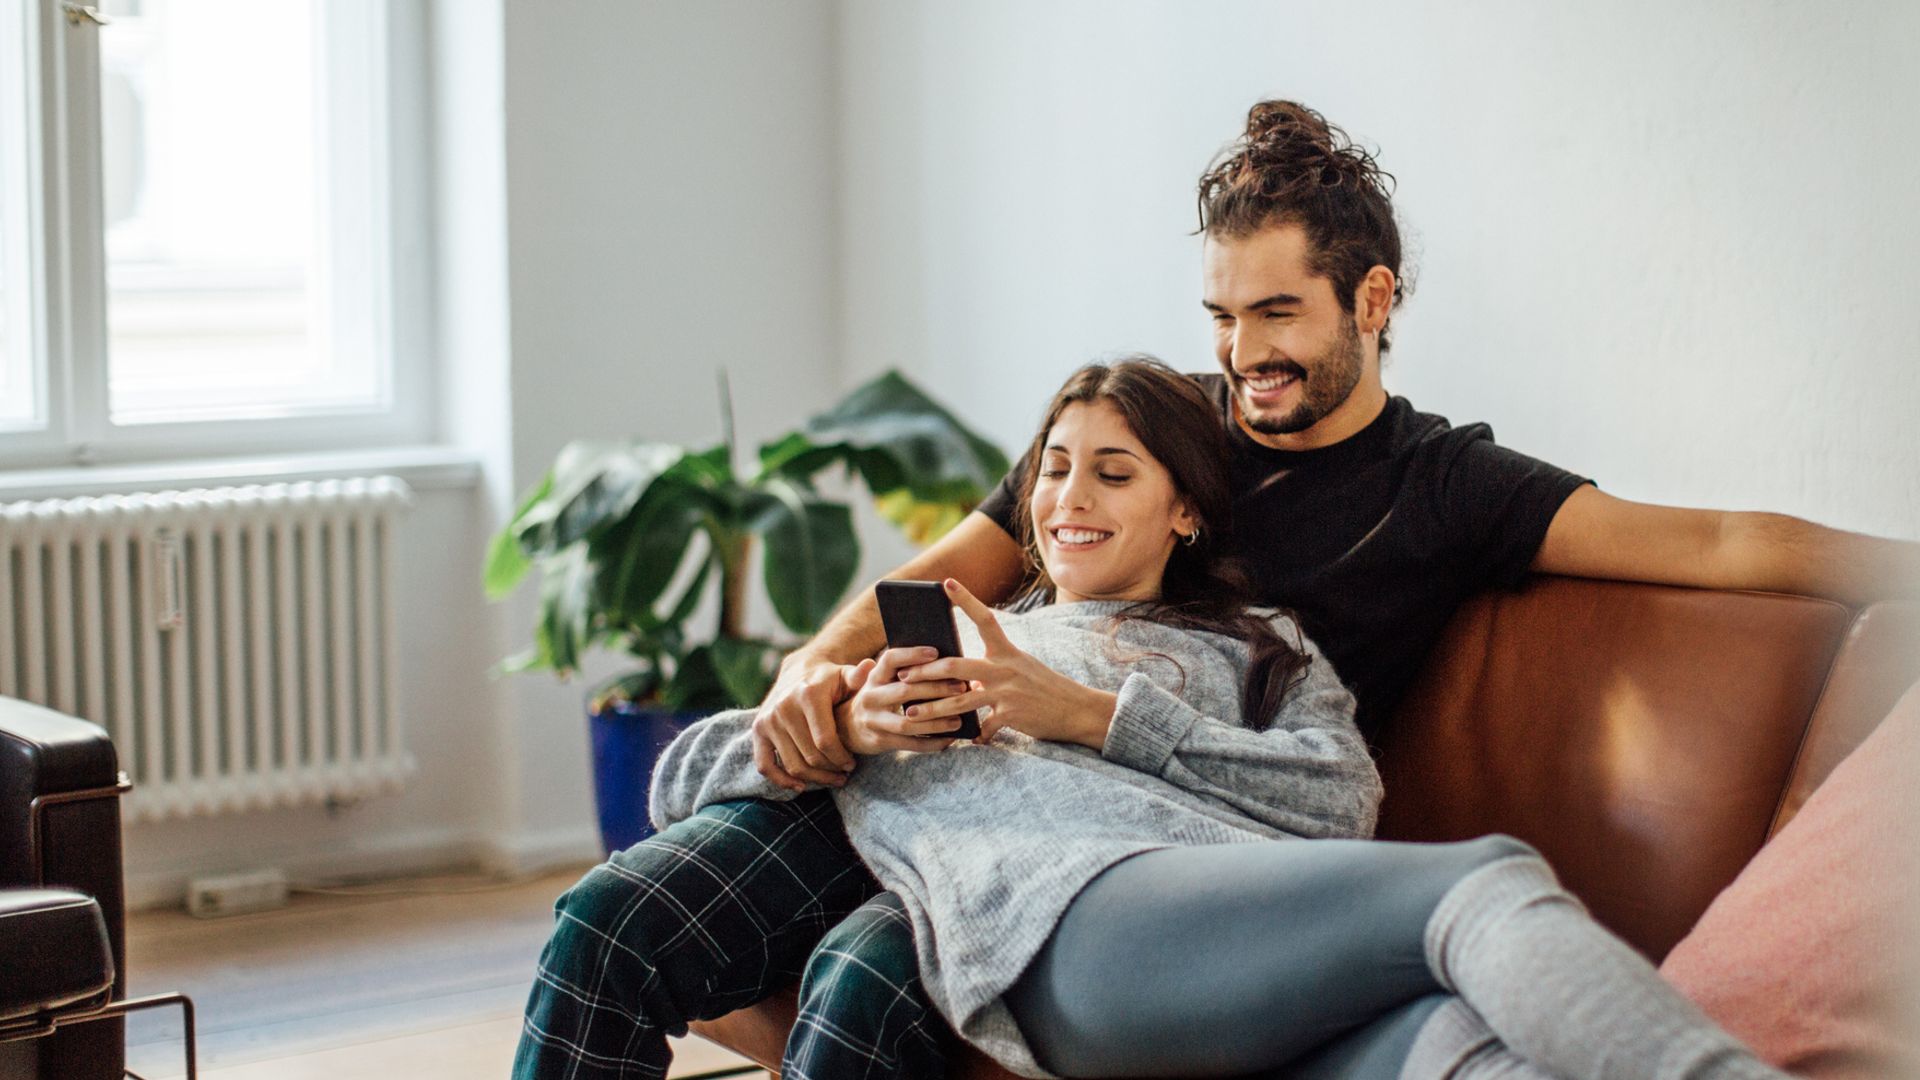 Smiling young woman using mobile phone while reclining on boyfriend sitting on sofa at home